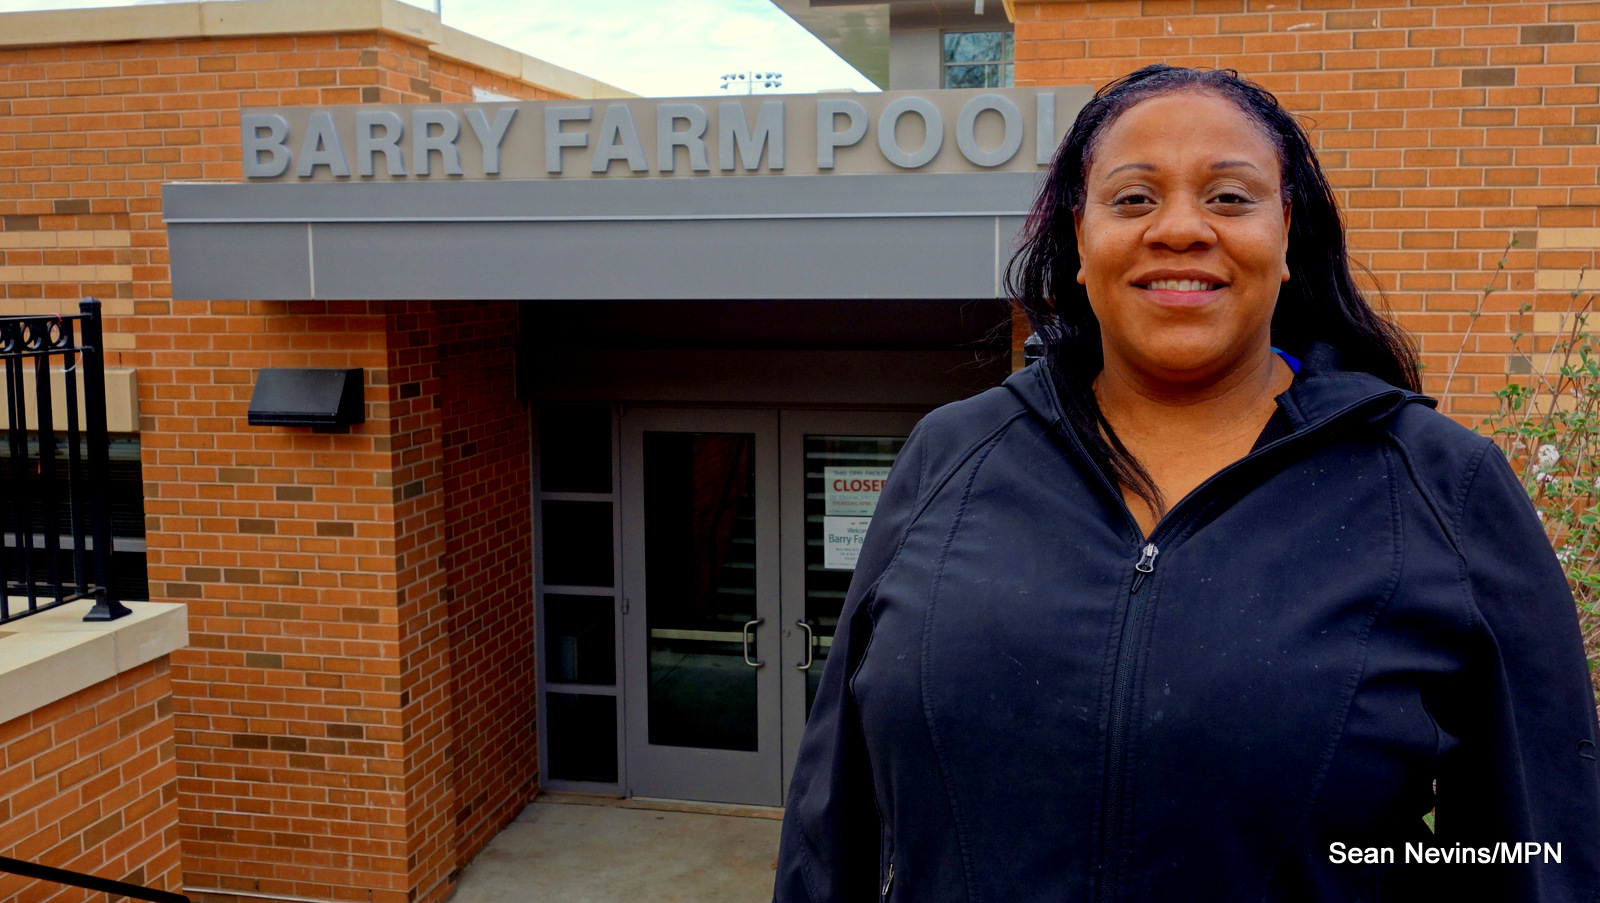 Phyllissa Bilal, resident and co-founder of the Barry Farm Study Circle, has lived in the neighborhood for about 3 years.